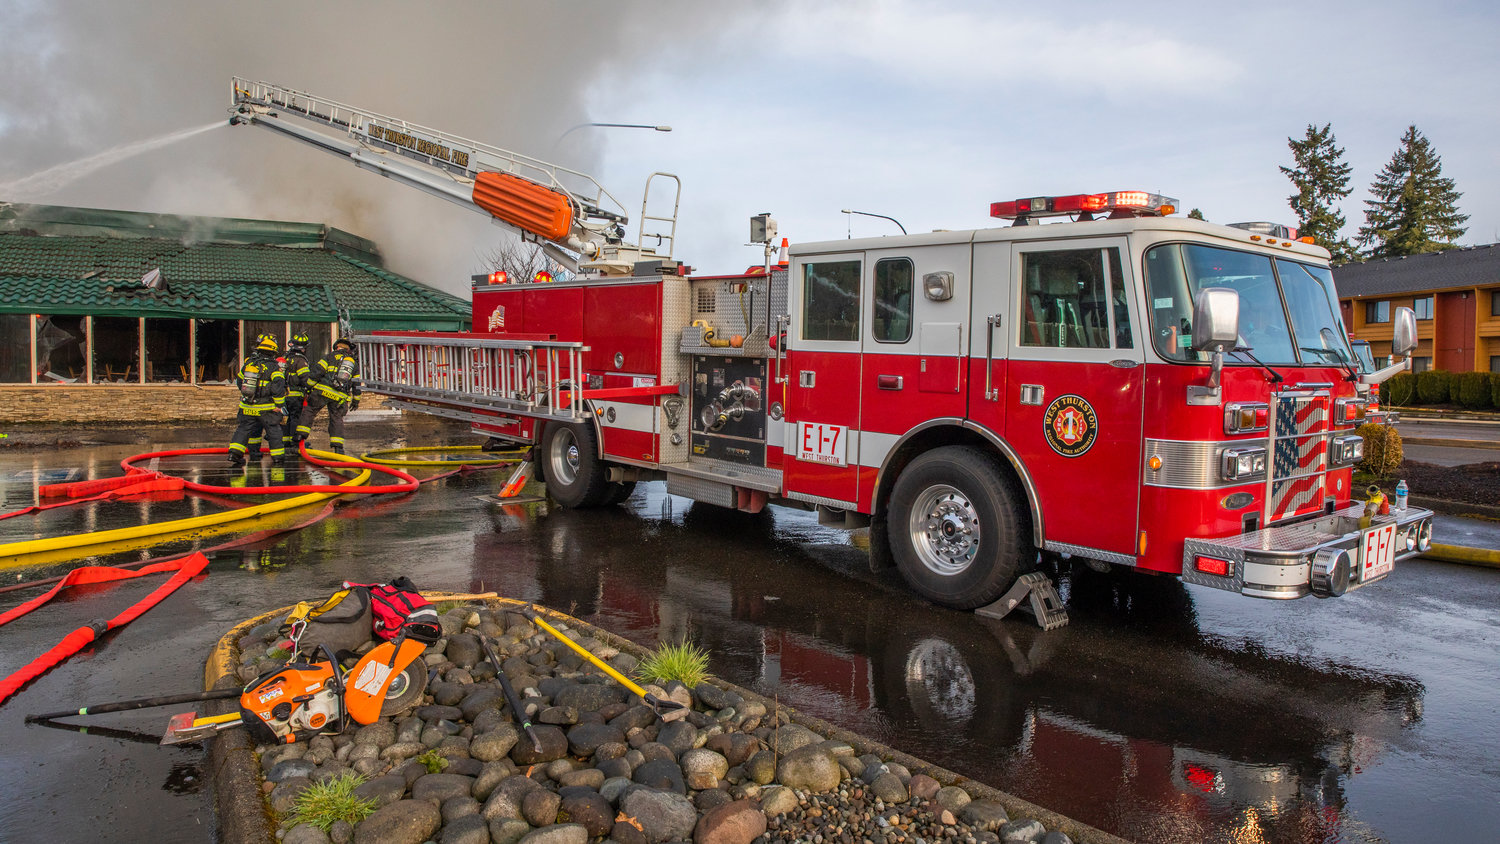 Riverside Fire Authority, Chehalis Fire, Lewis County Fire District 6 and West Thurston Fire responds to a commercial structure fire at Papa Pete's in Centralia on Sunday.